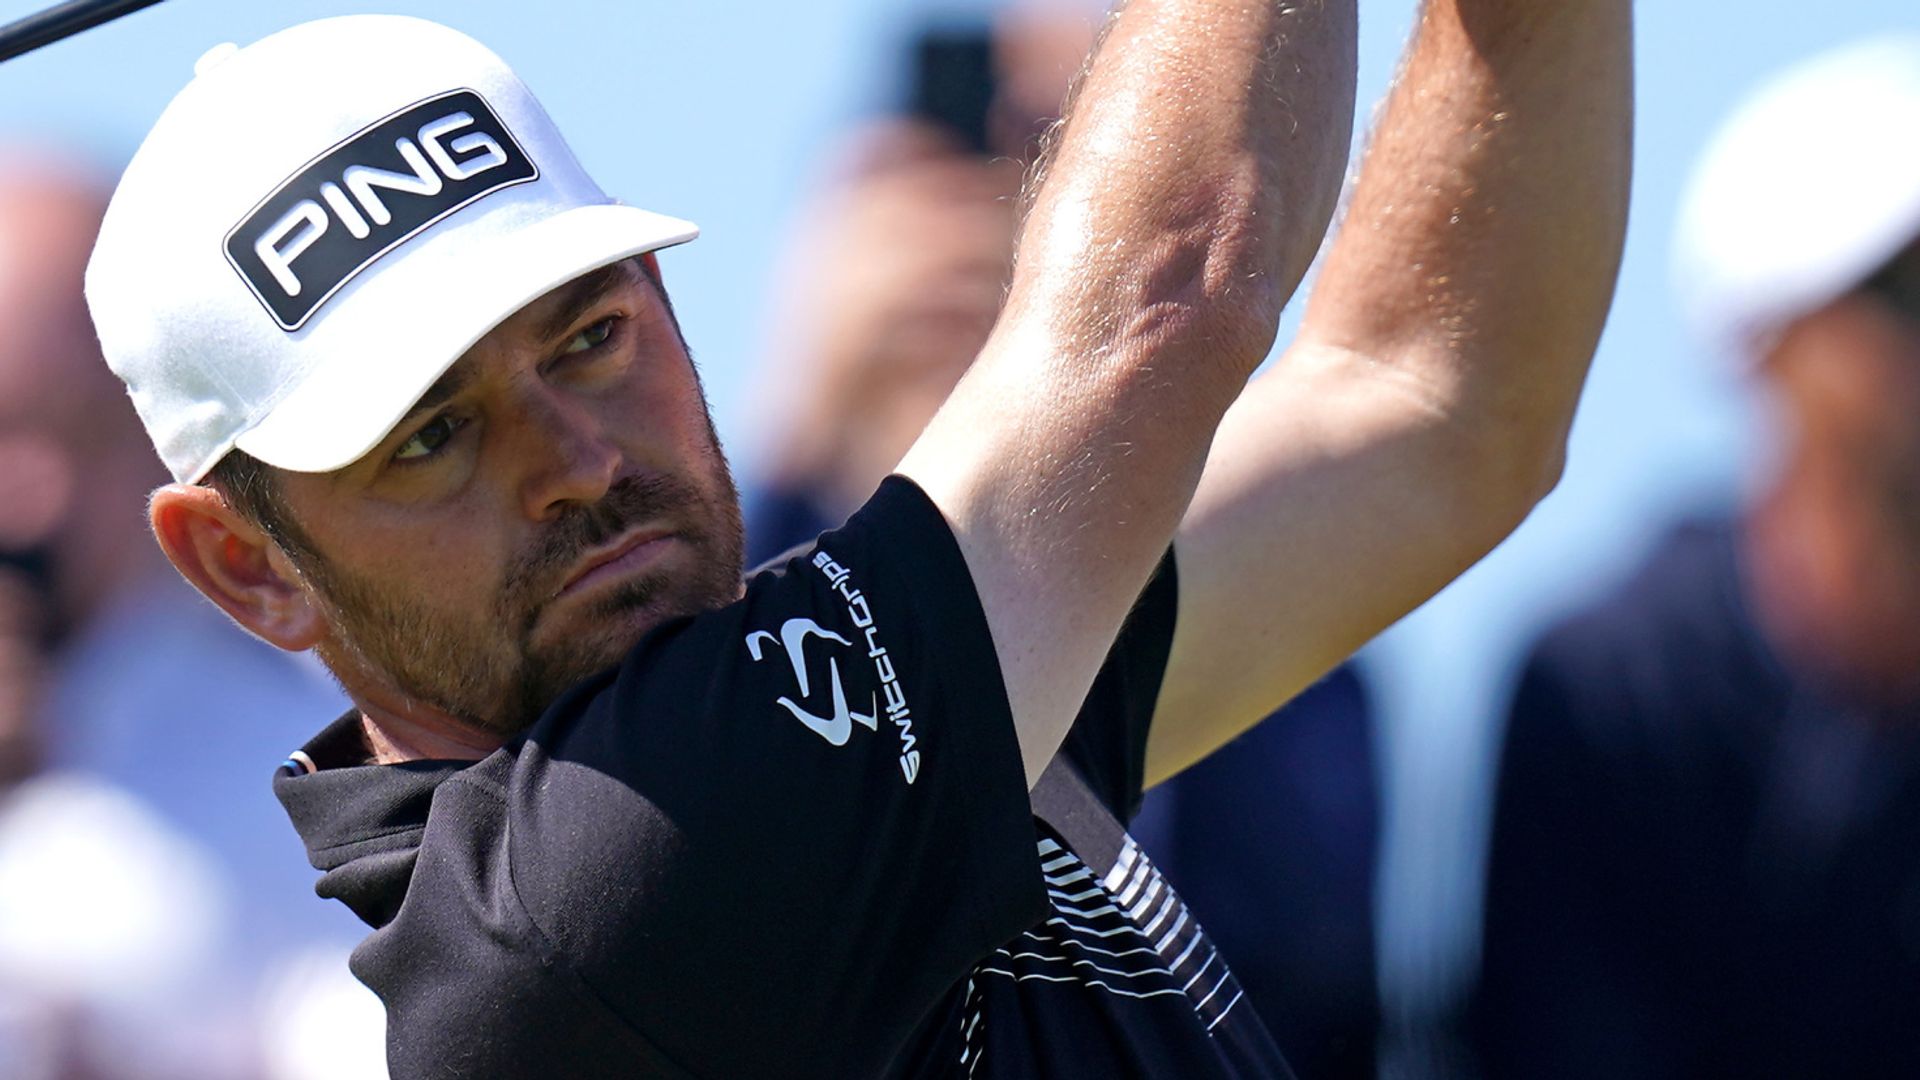 Oosthuizen leads after breaking Open record